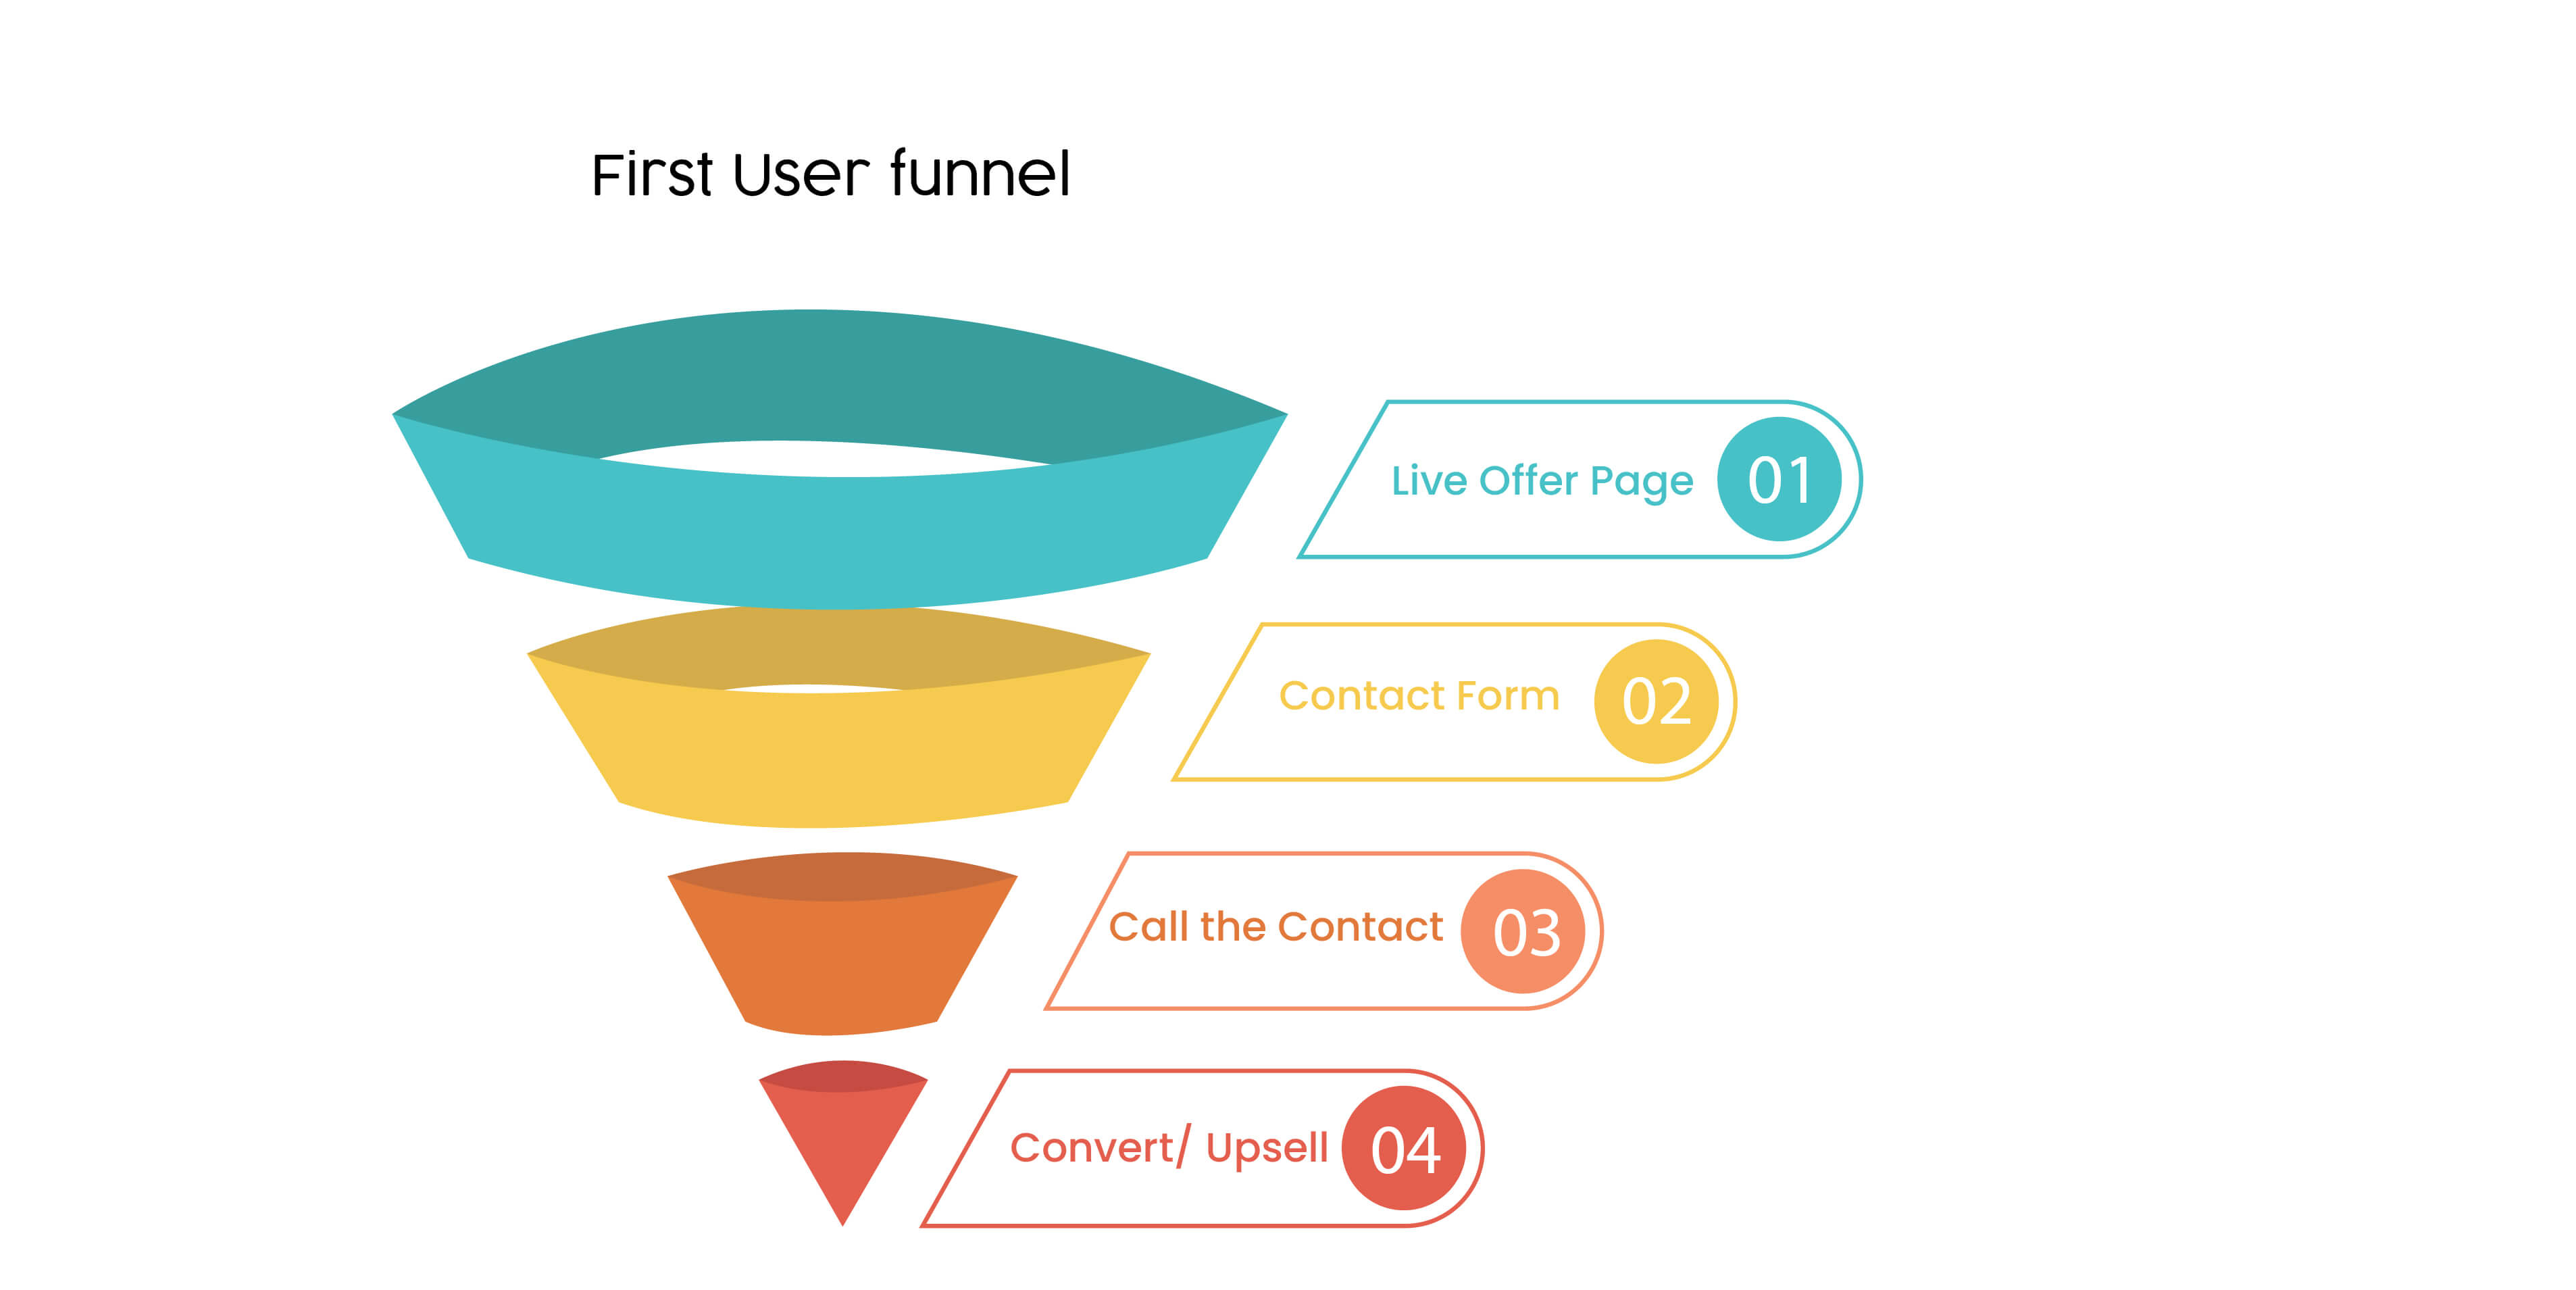 First user funnel tempalte for sales